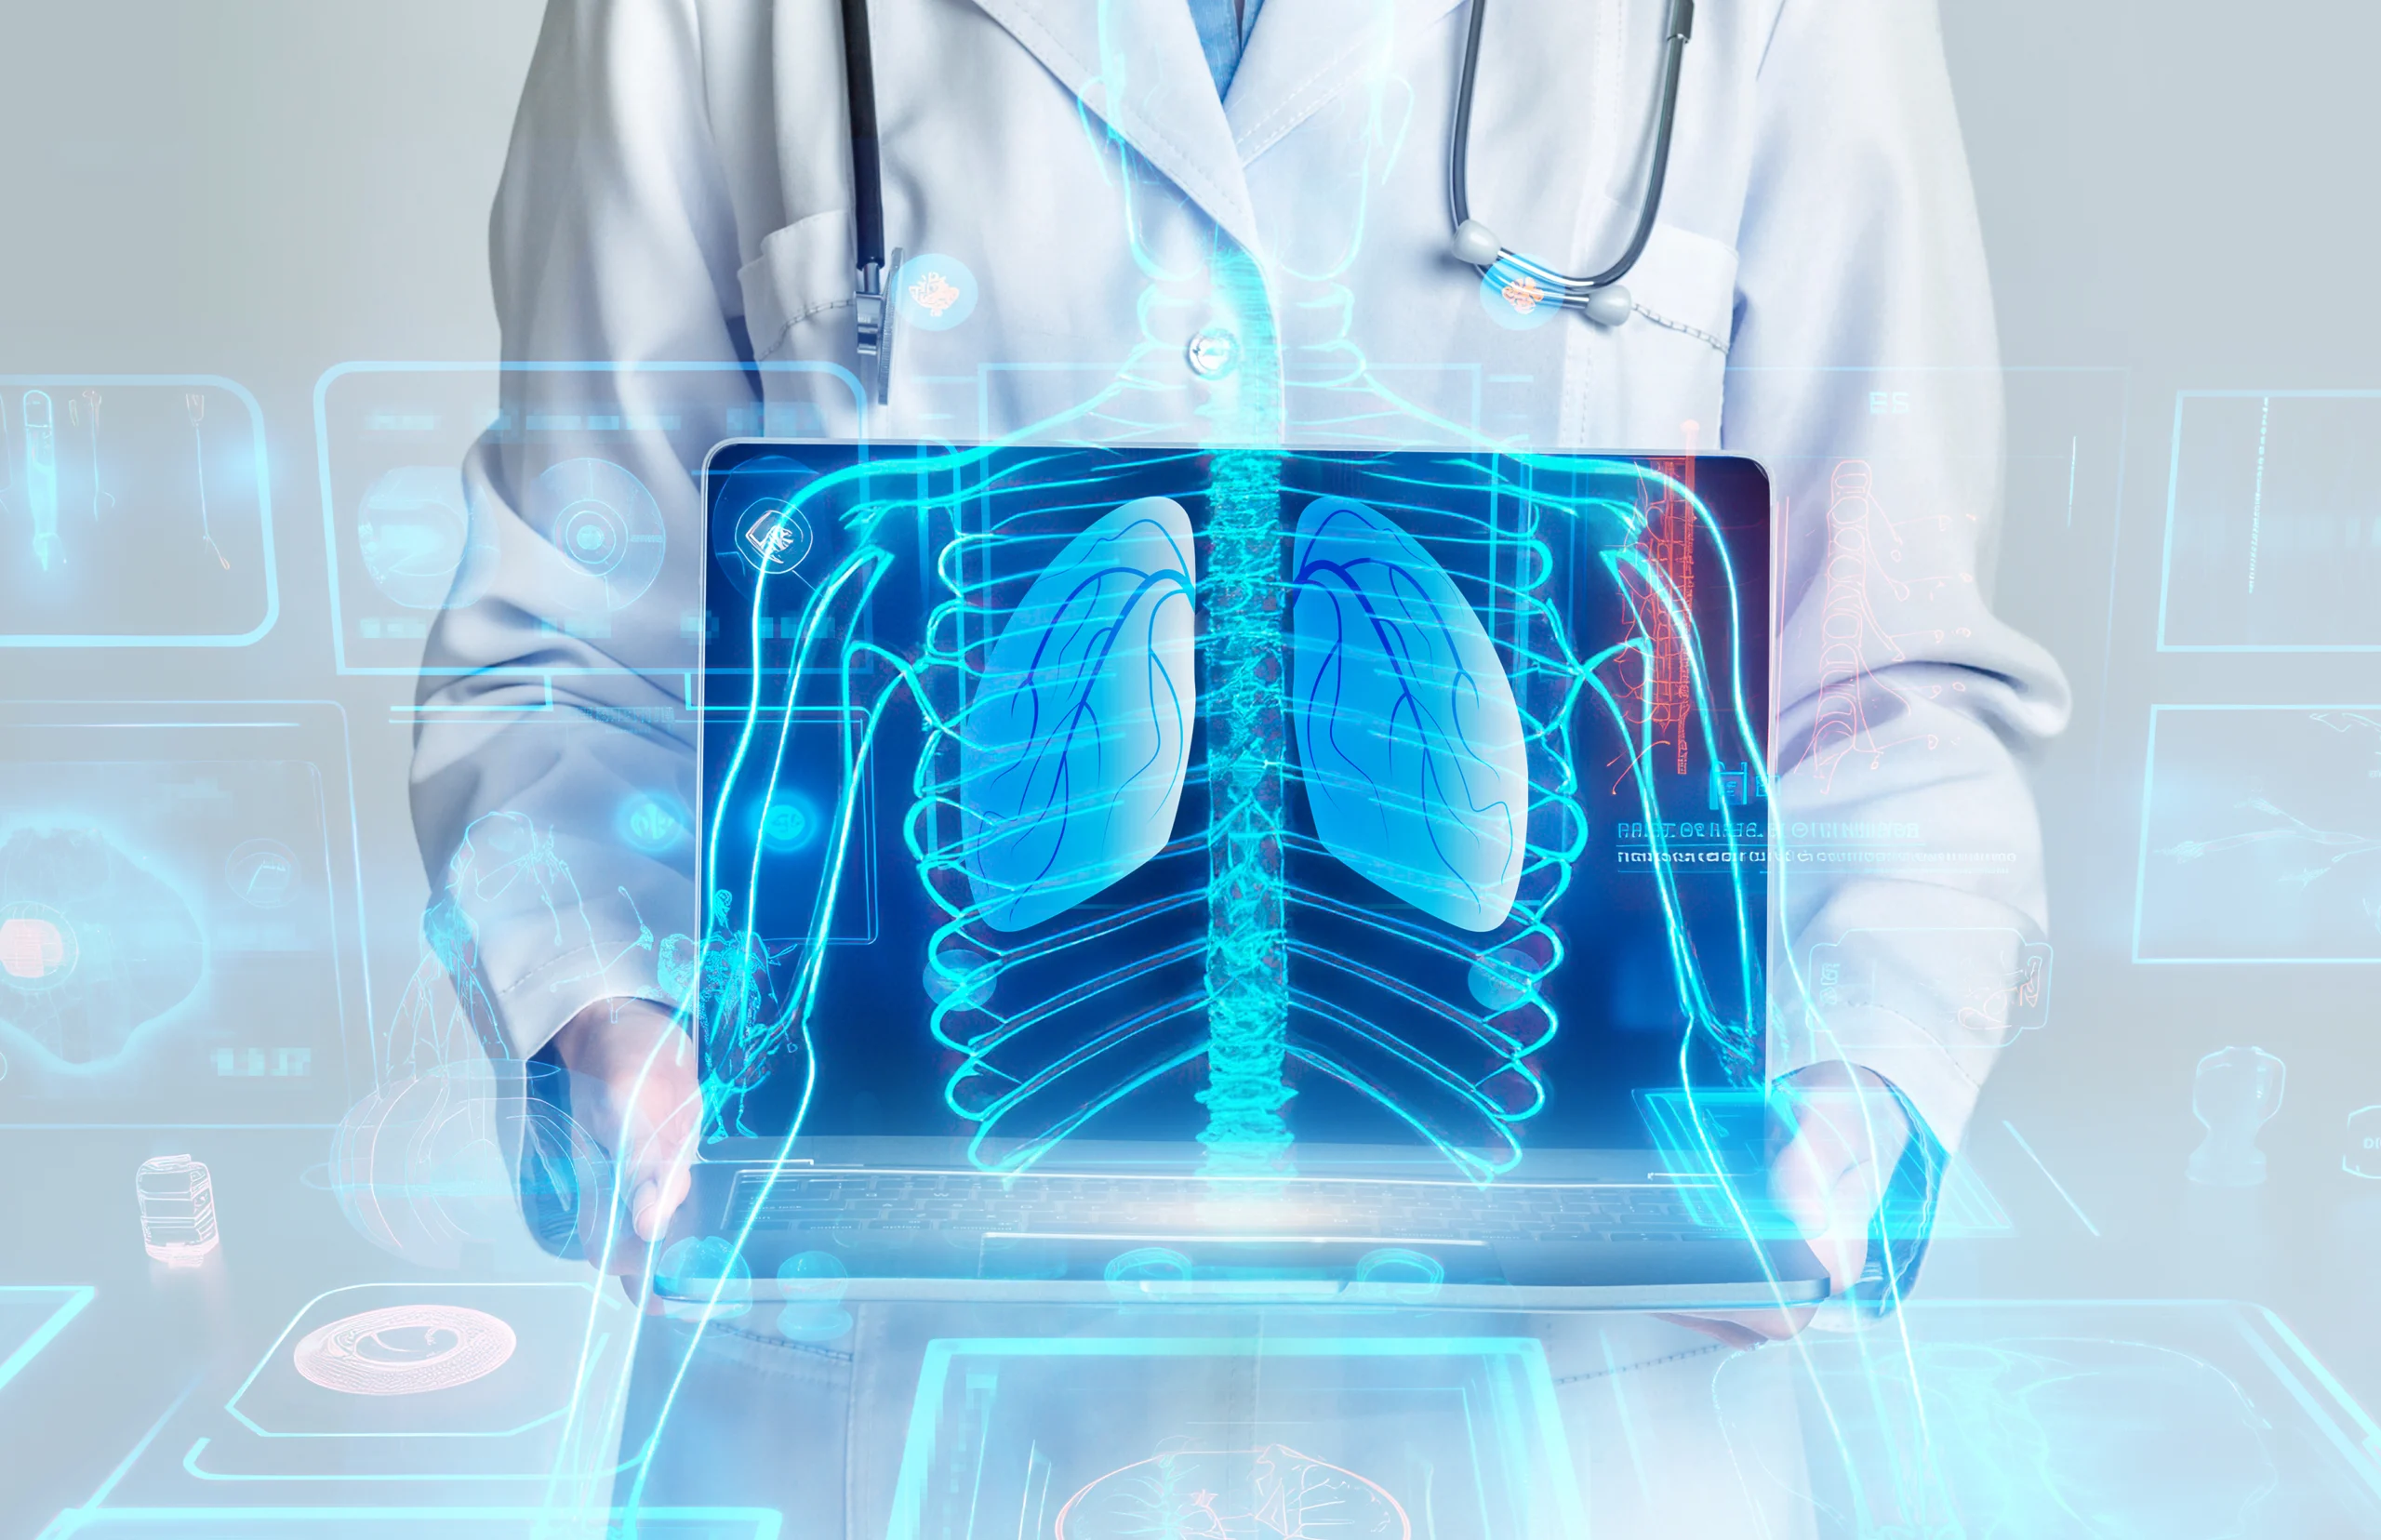 The Internet of Medical Things: Its Role in Enabling Connected Healthcare